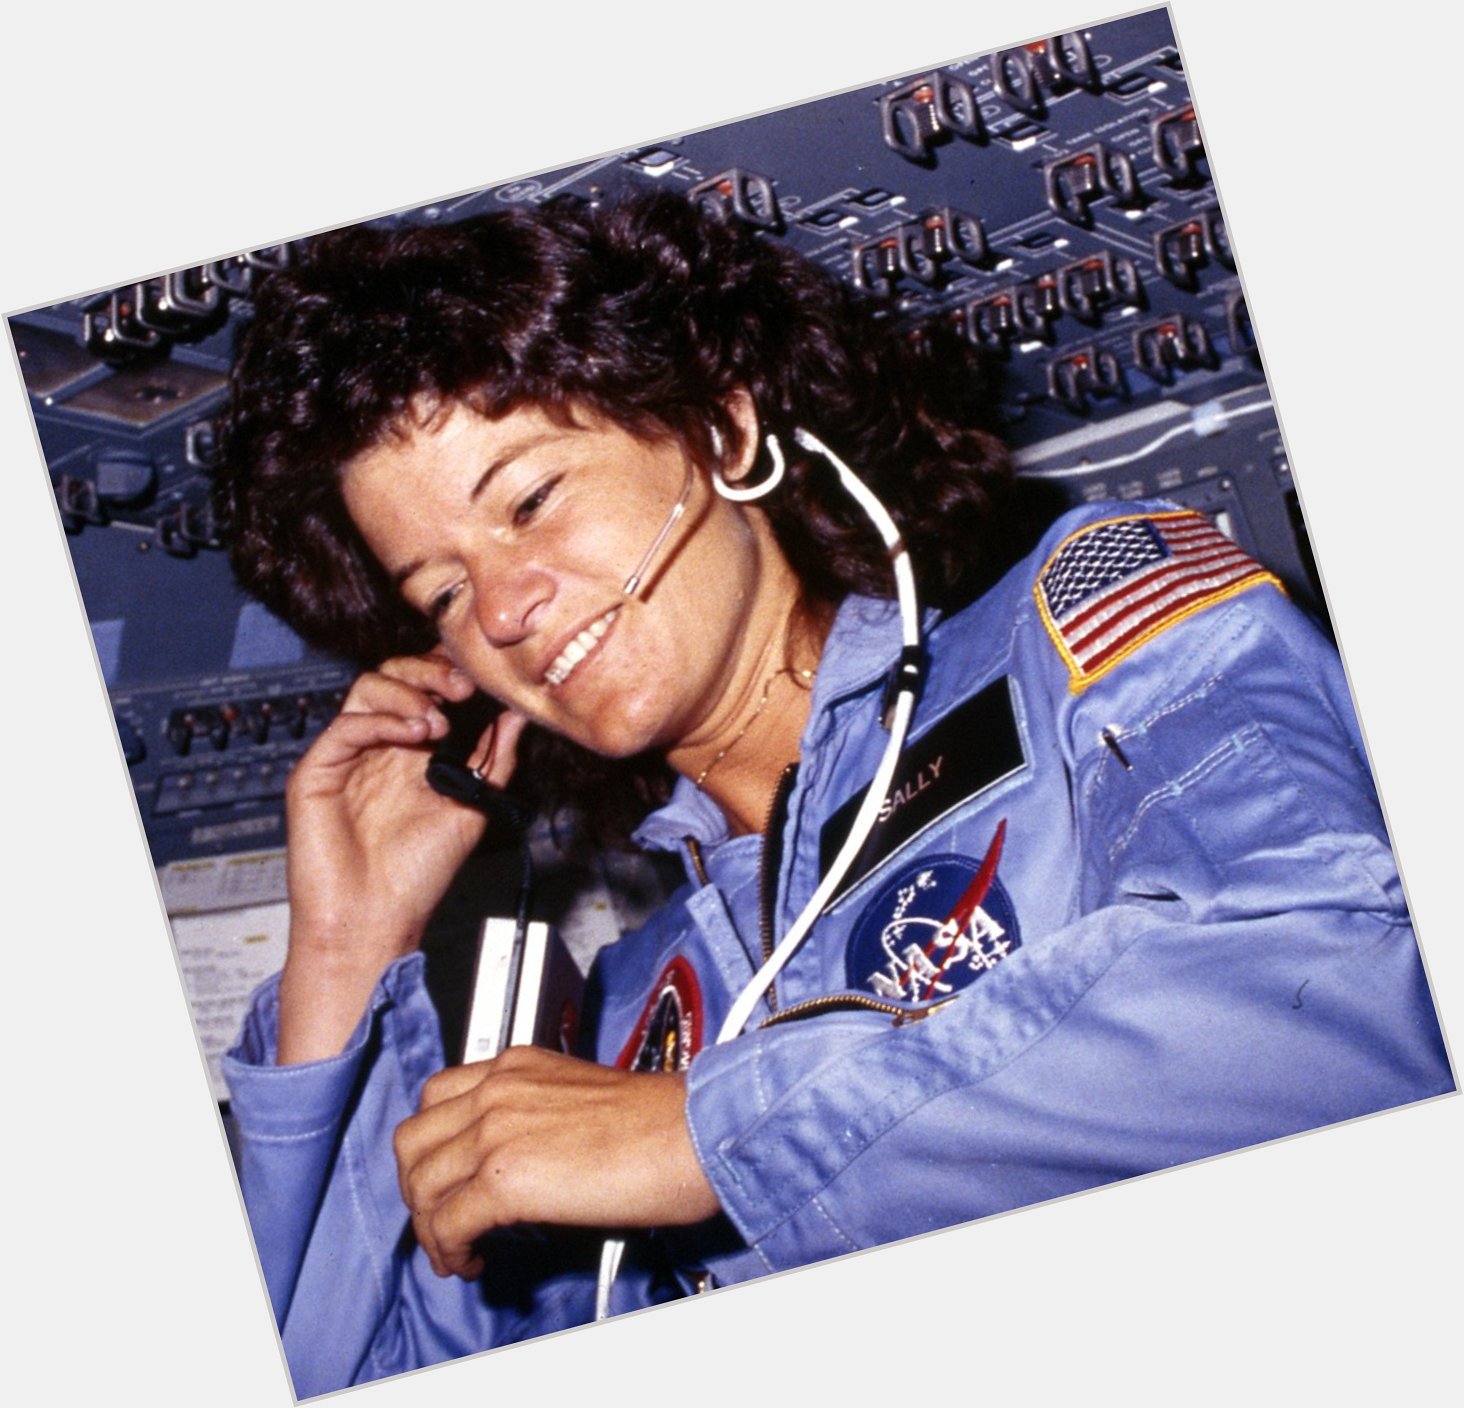 Happy bday Sally Ride. The first American woman in space. 